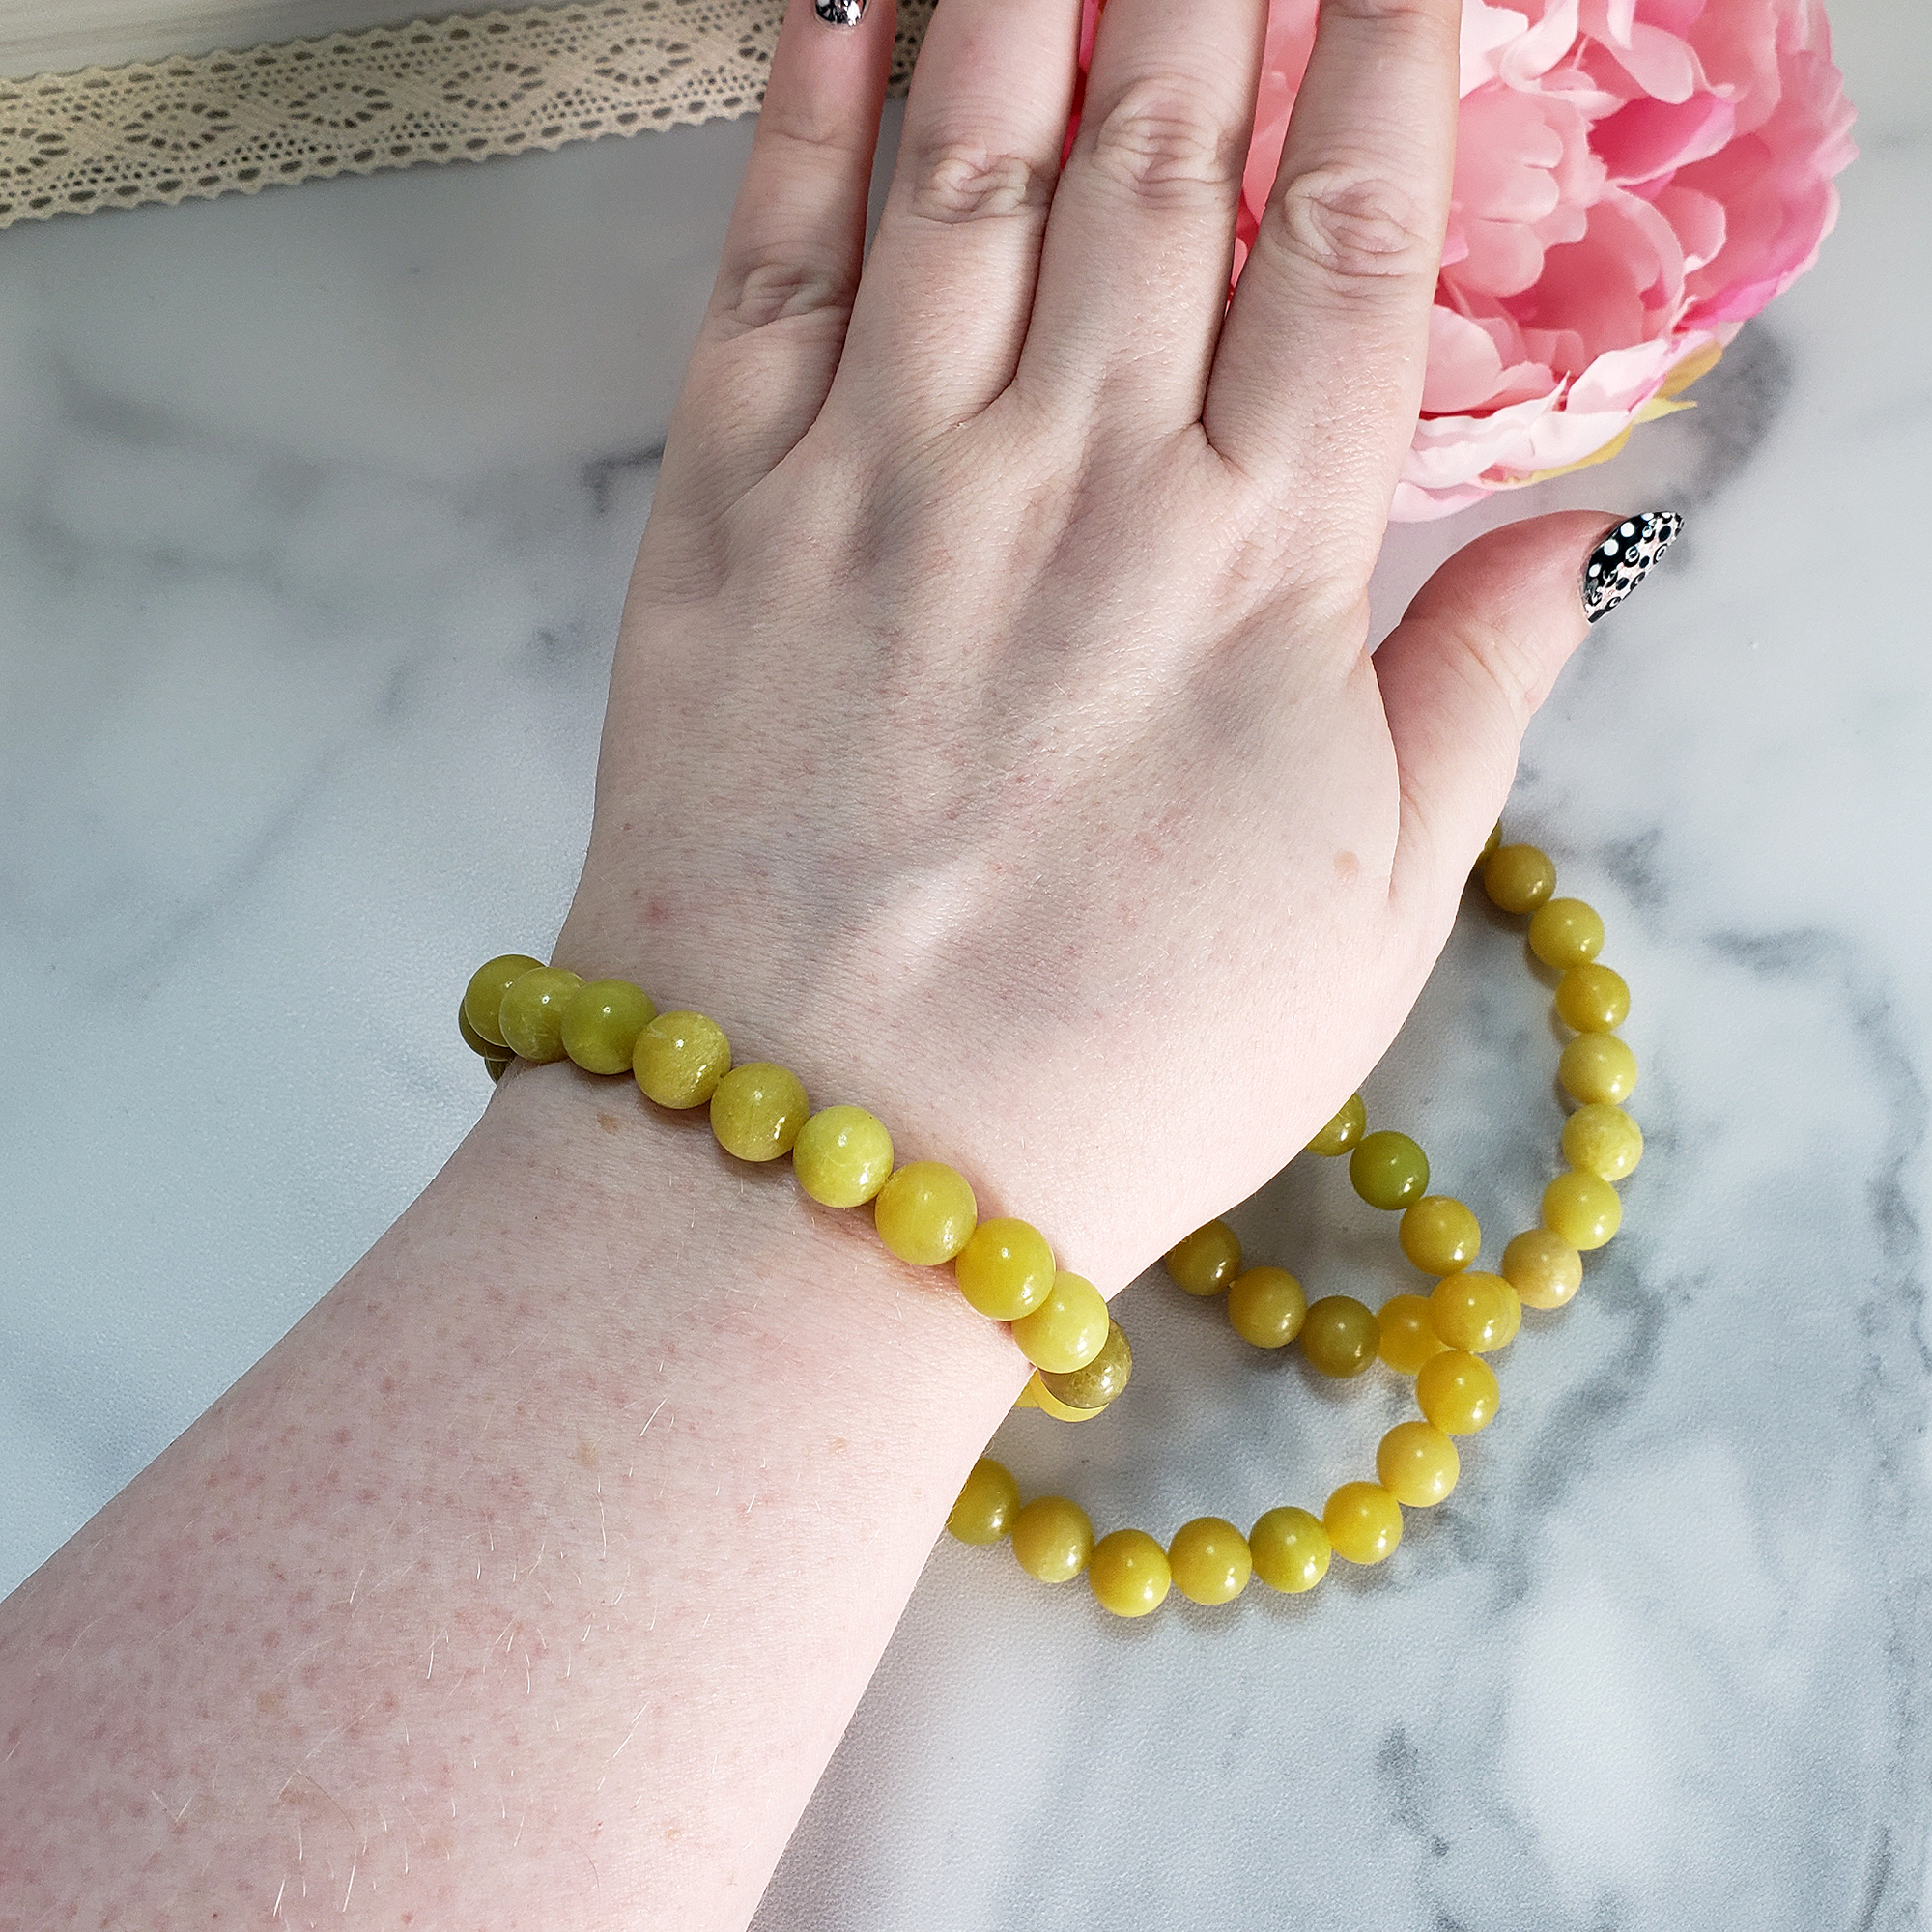 Yellow Serpentine Natural Crystal 7-8mm Bead Bracelet - Serpentine Crystal Beaded Bracelet on Wrist Above Other Bracelets